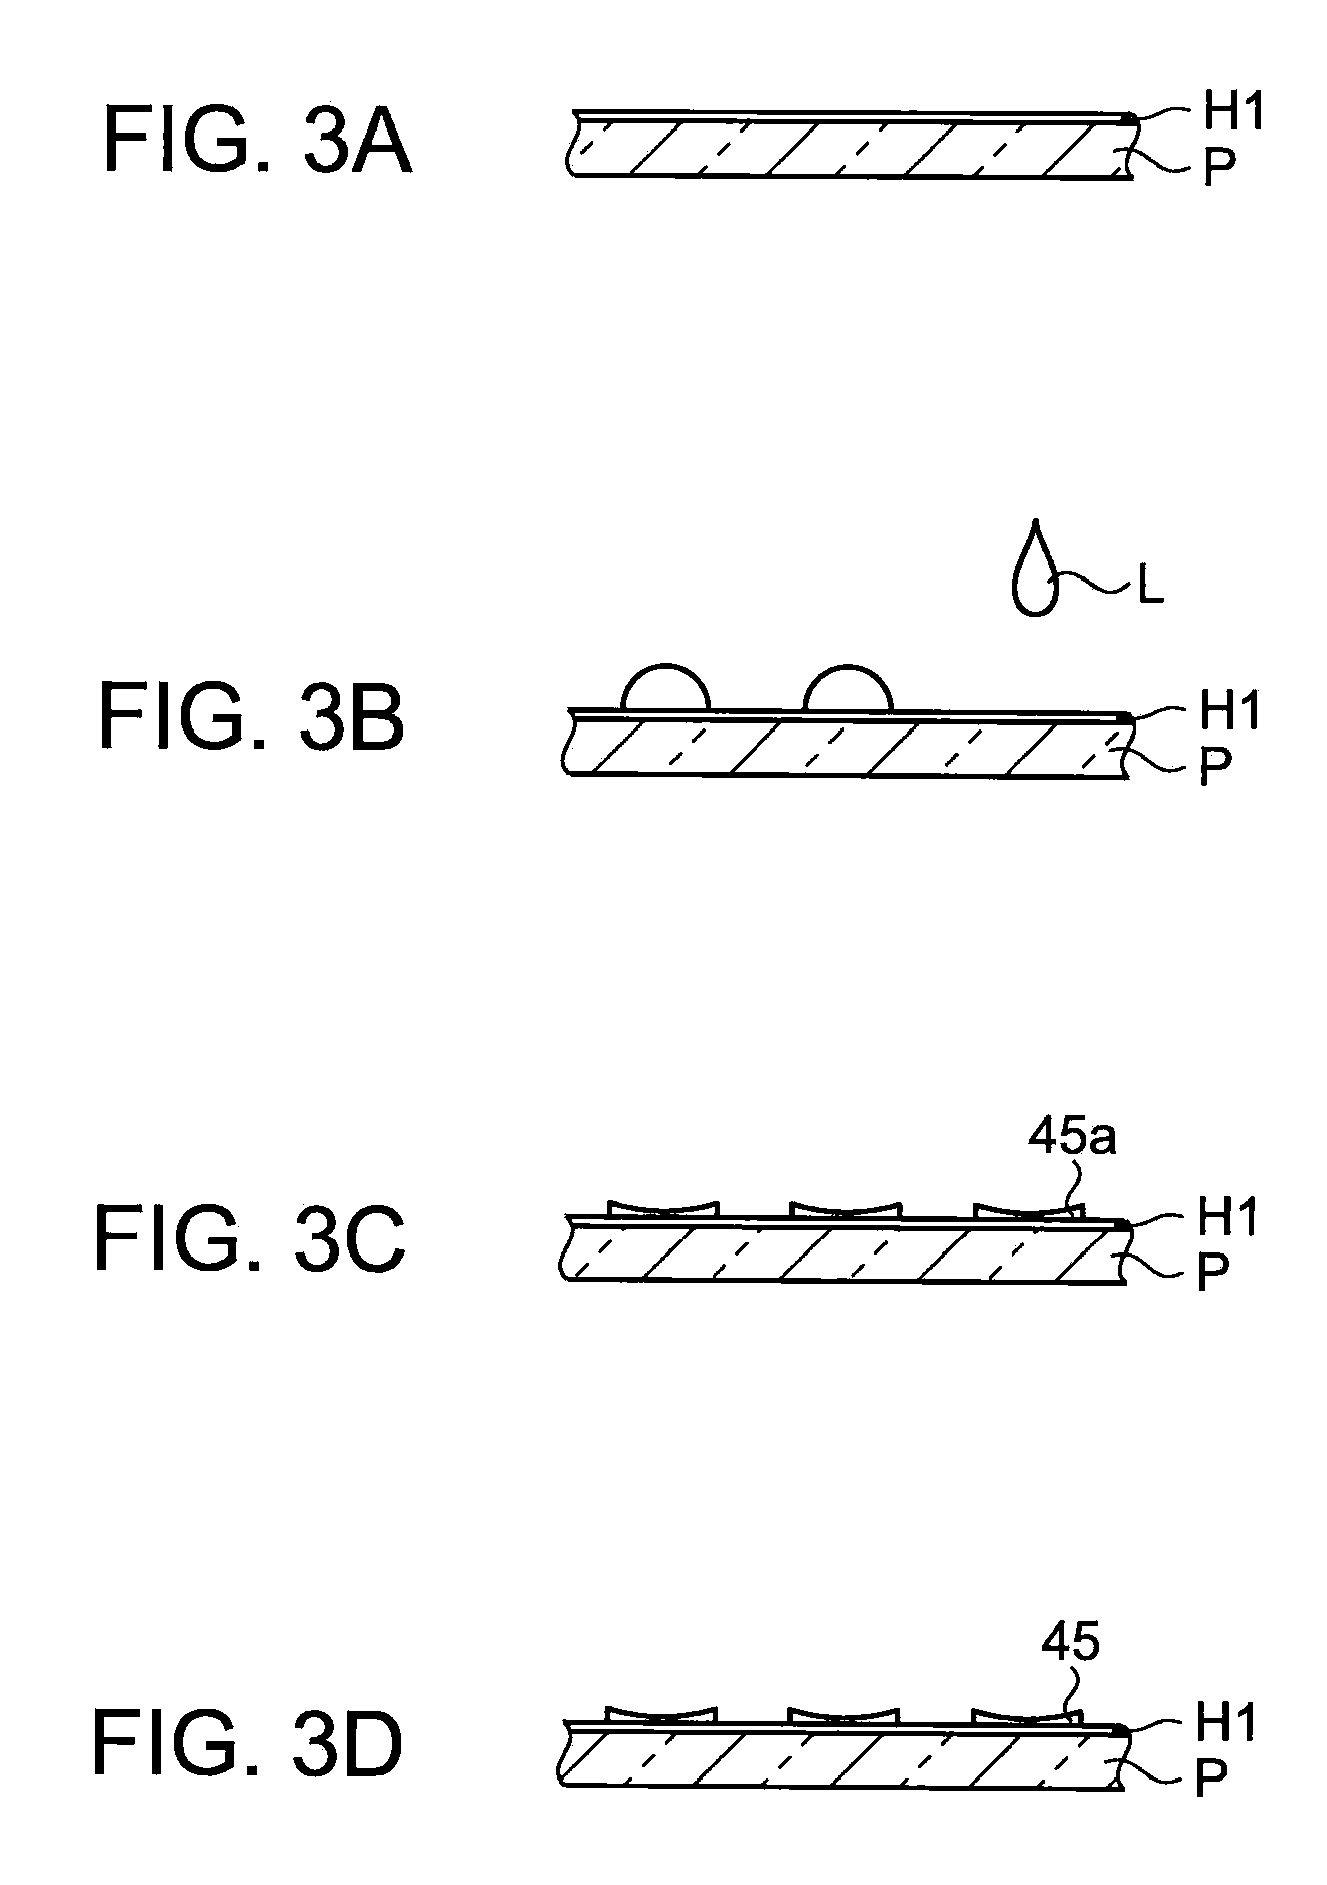 Bonding pad fabrication method, method for fabricating a bonding pad and an electronic device, and electronic device